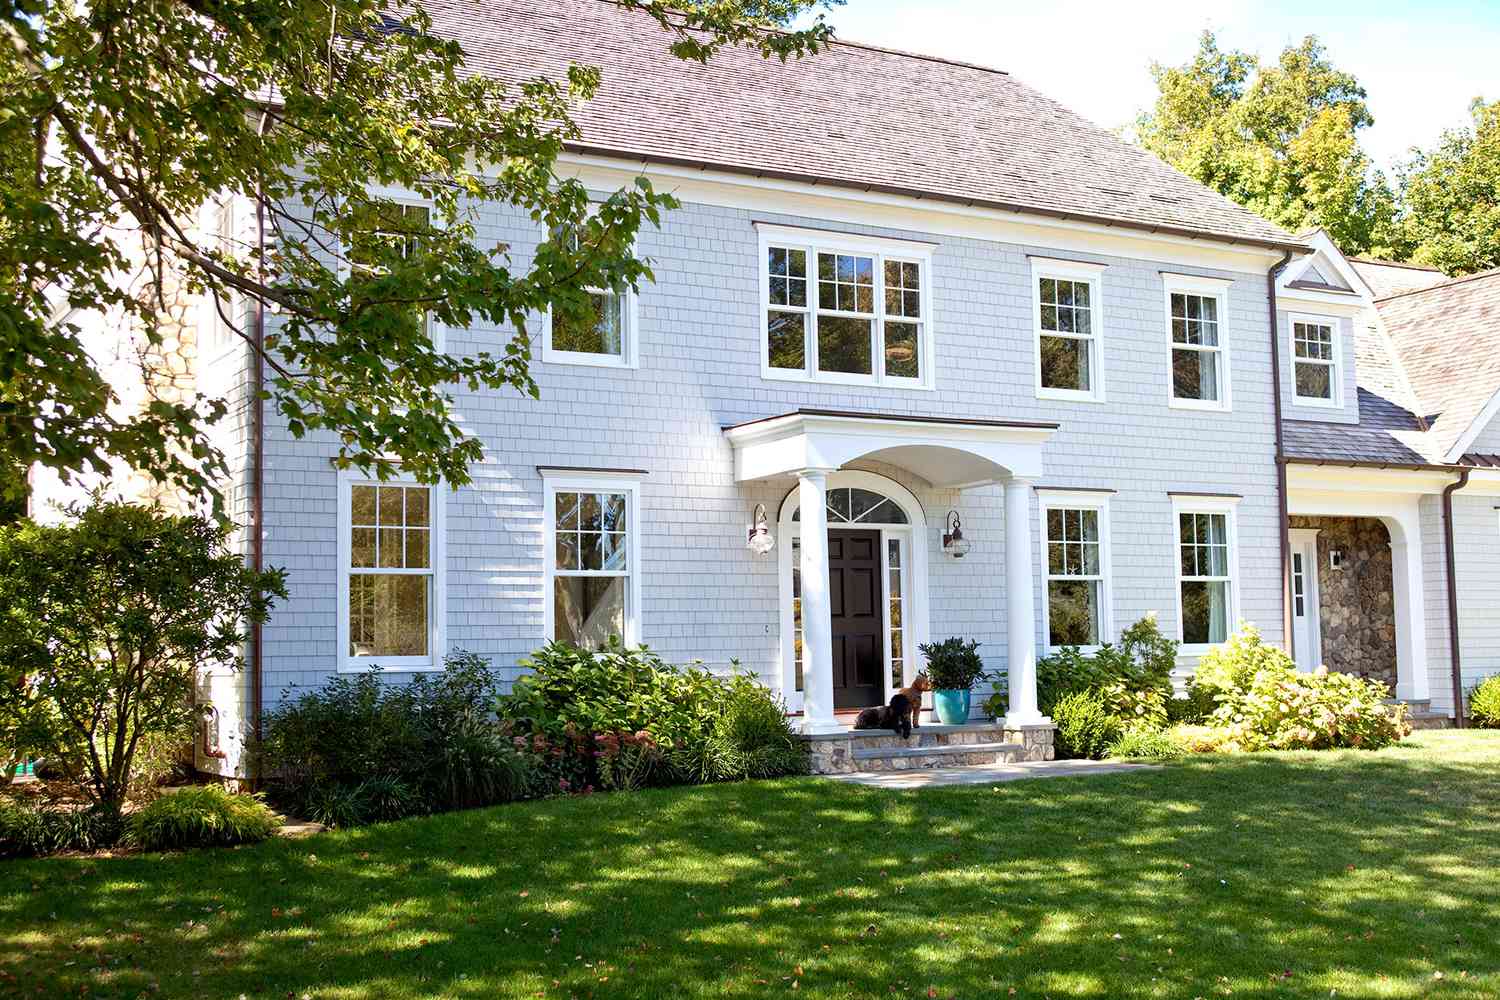 Blue colonial home with white column entryway